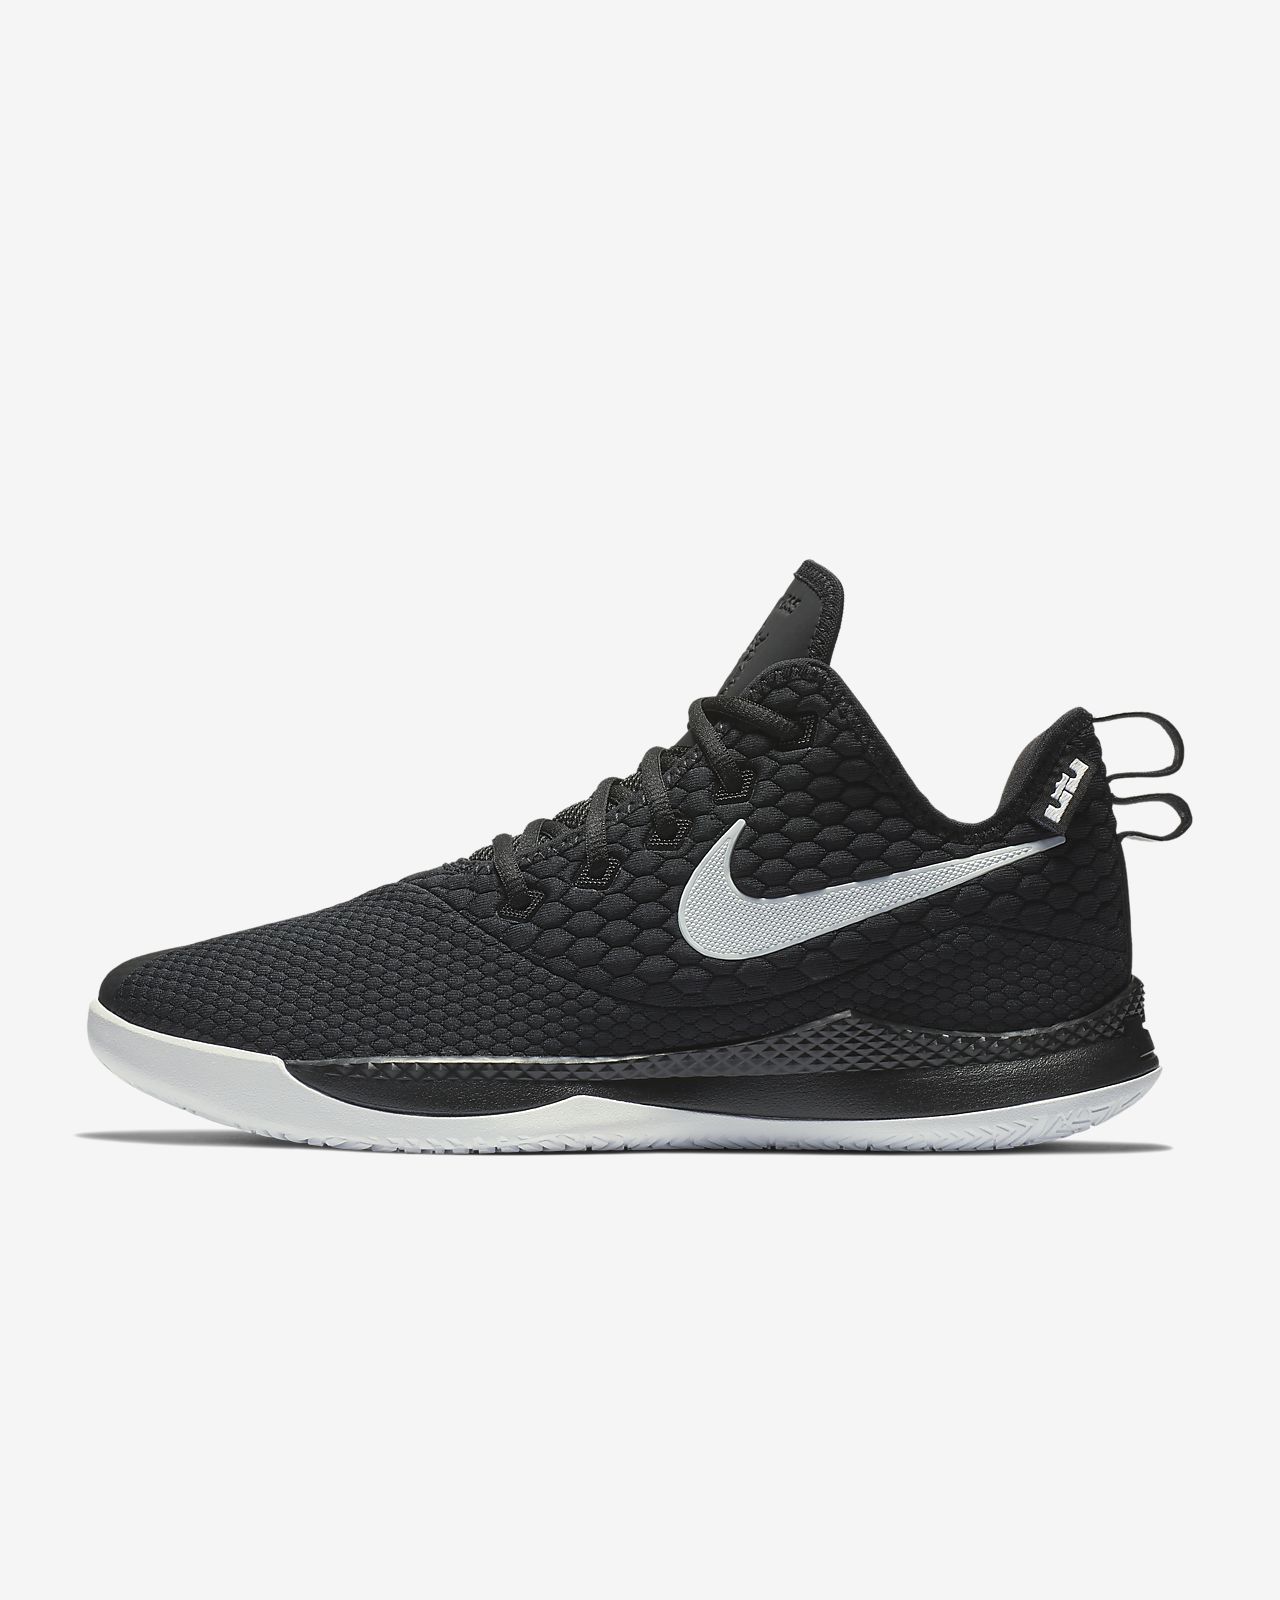 lebron witness 3 black and white cheap 